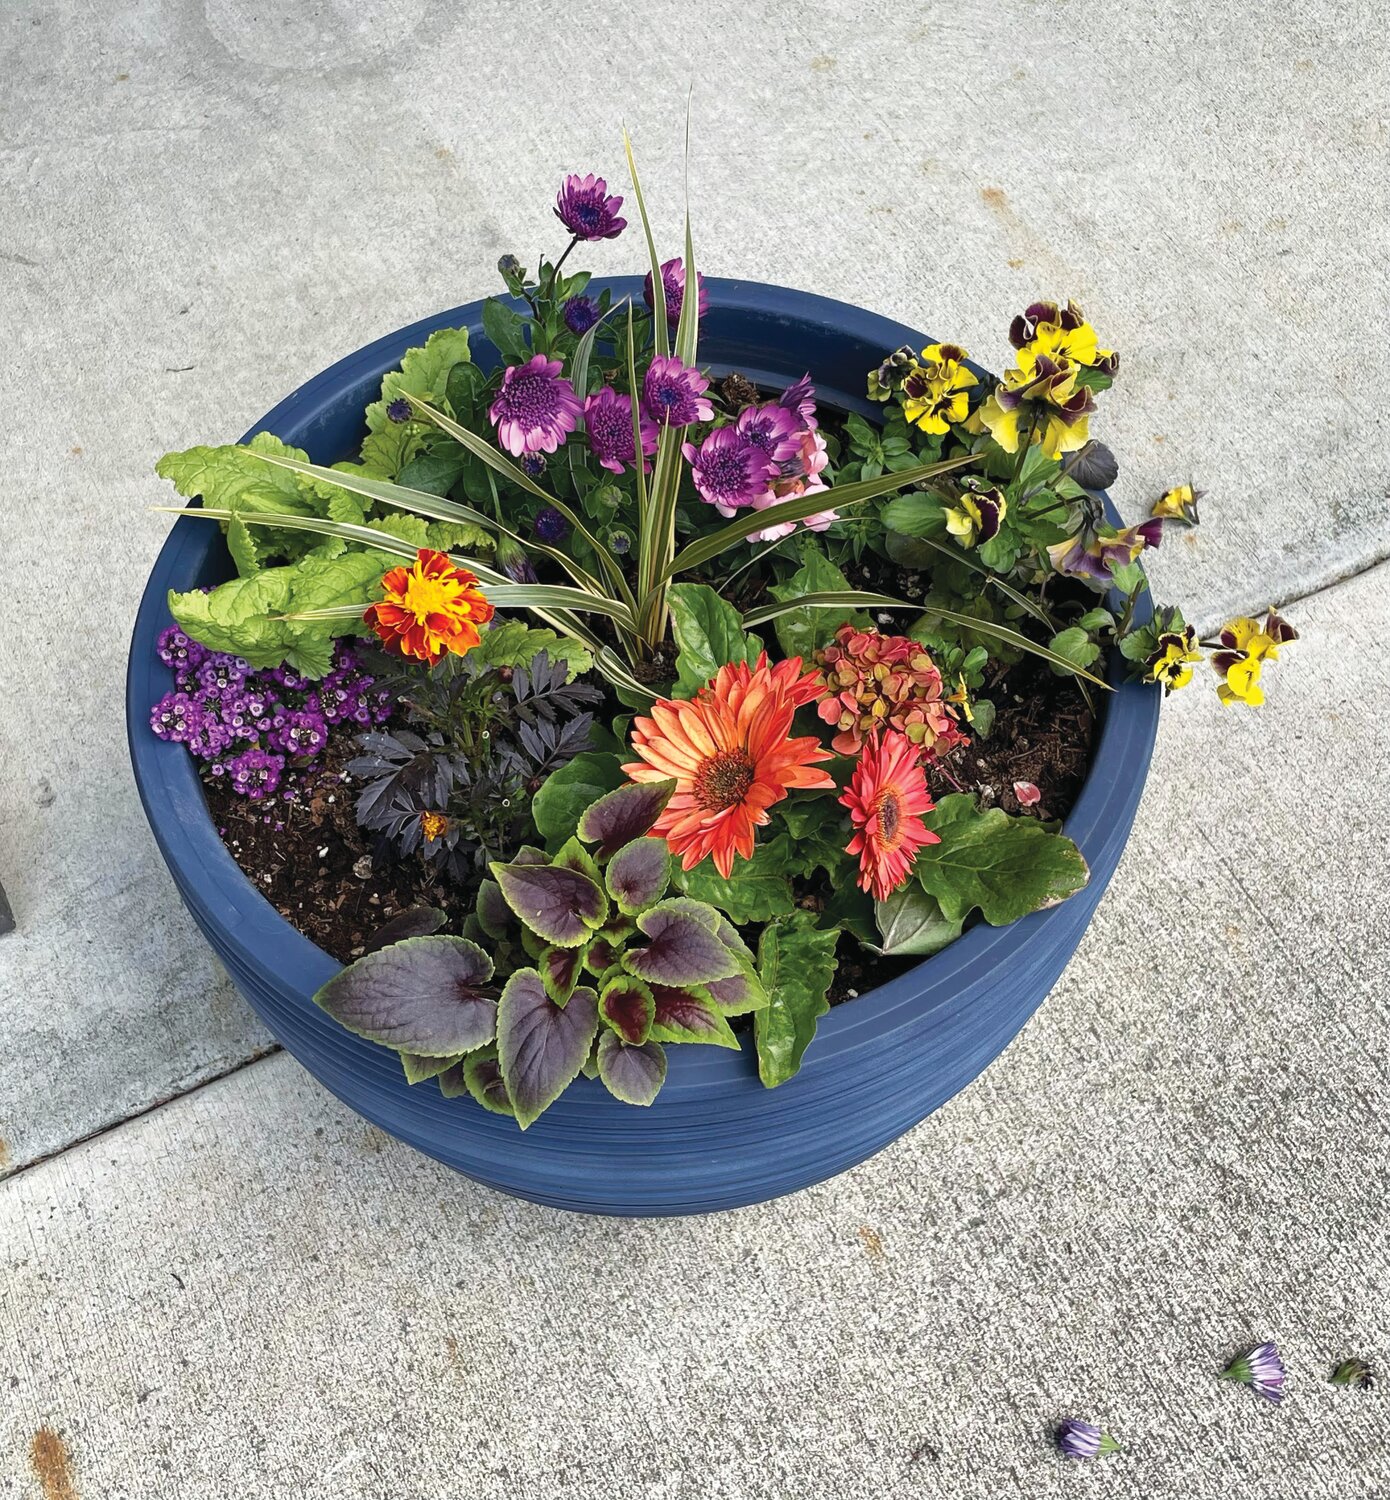 Mixed spring flowers and interesting foliage are featured in one of the container gardens at Avamere in Port Townsend. Containers can be placed on tables or benches within easy reach.